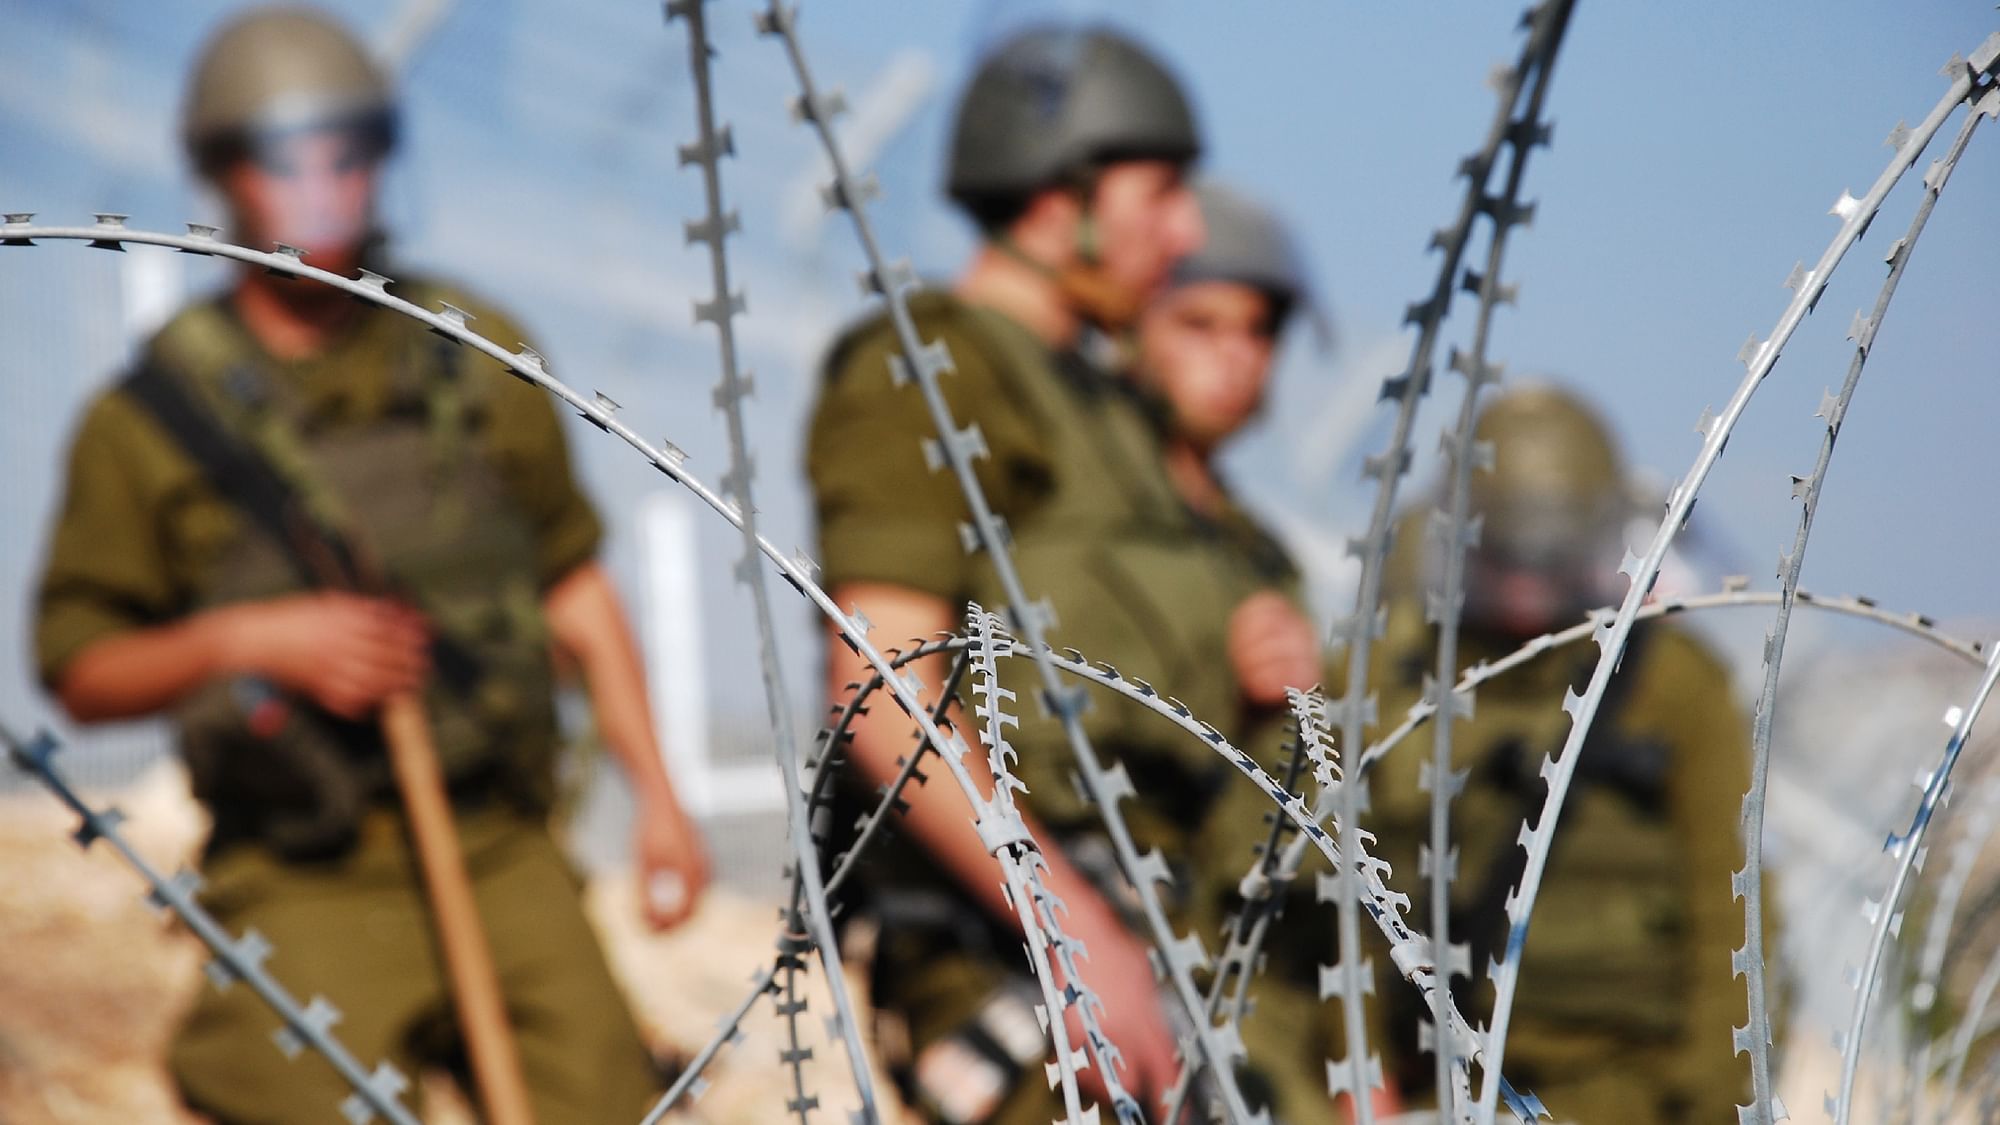 <div class="paragraphs"><p>Four Israeli soldiers stand behind razor wire near a Palestinian village in the West Bank. Image used for representational purposes only.&nbsp;</p></div>